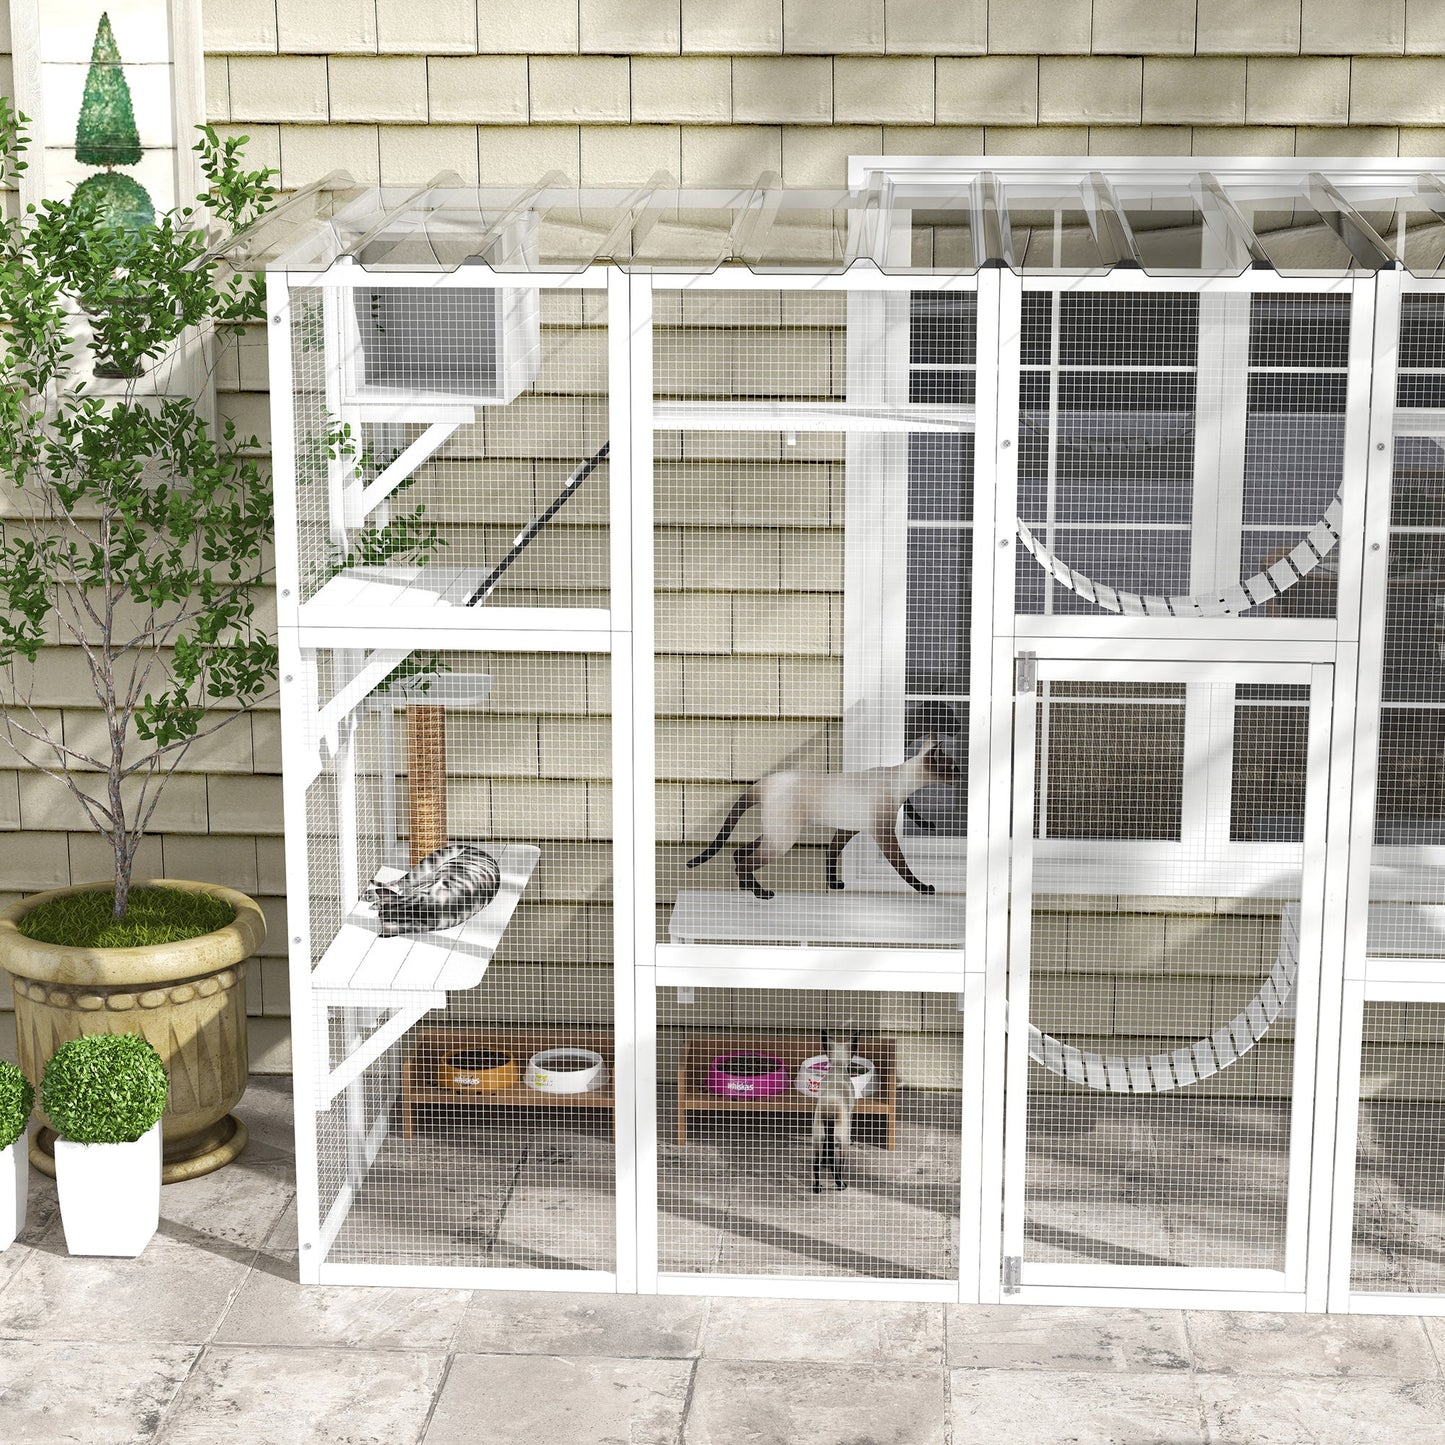 Large Outdoor Catio with Condos, Platforms, Doors, Ladders, Weather-Resistant Roof, White at Gallery Canada